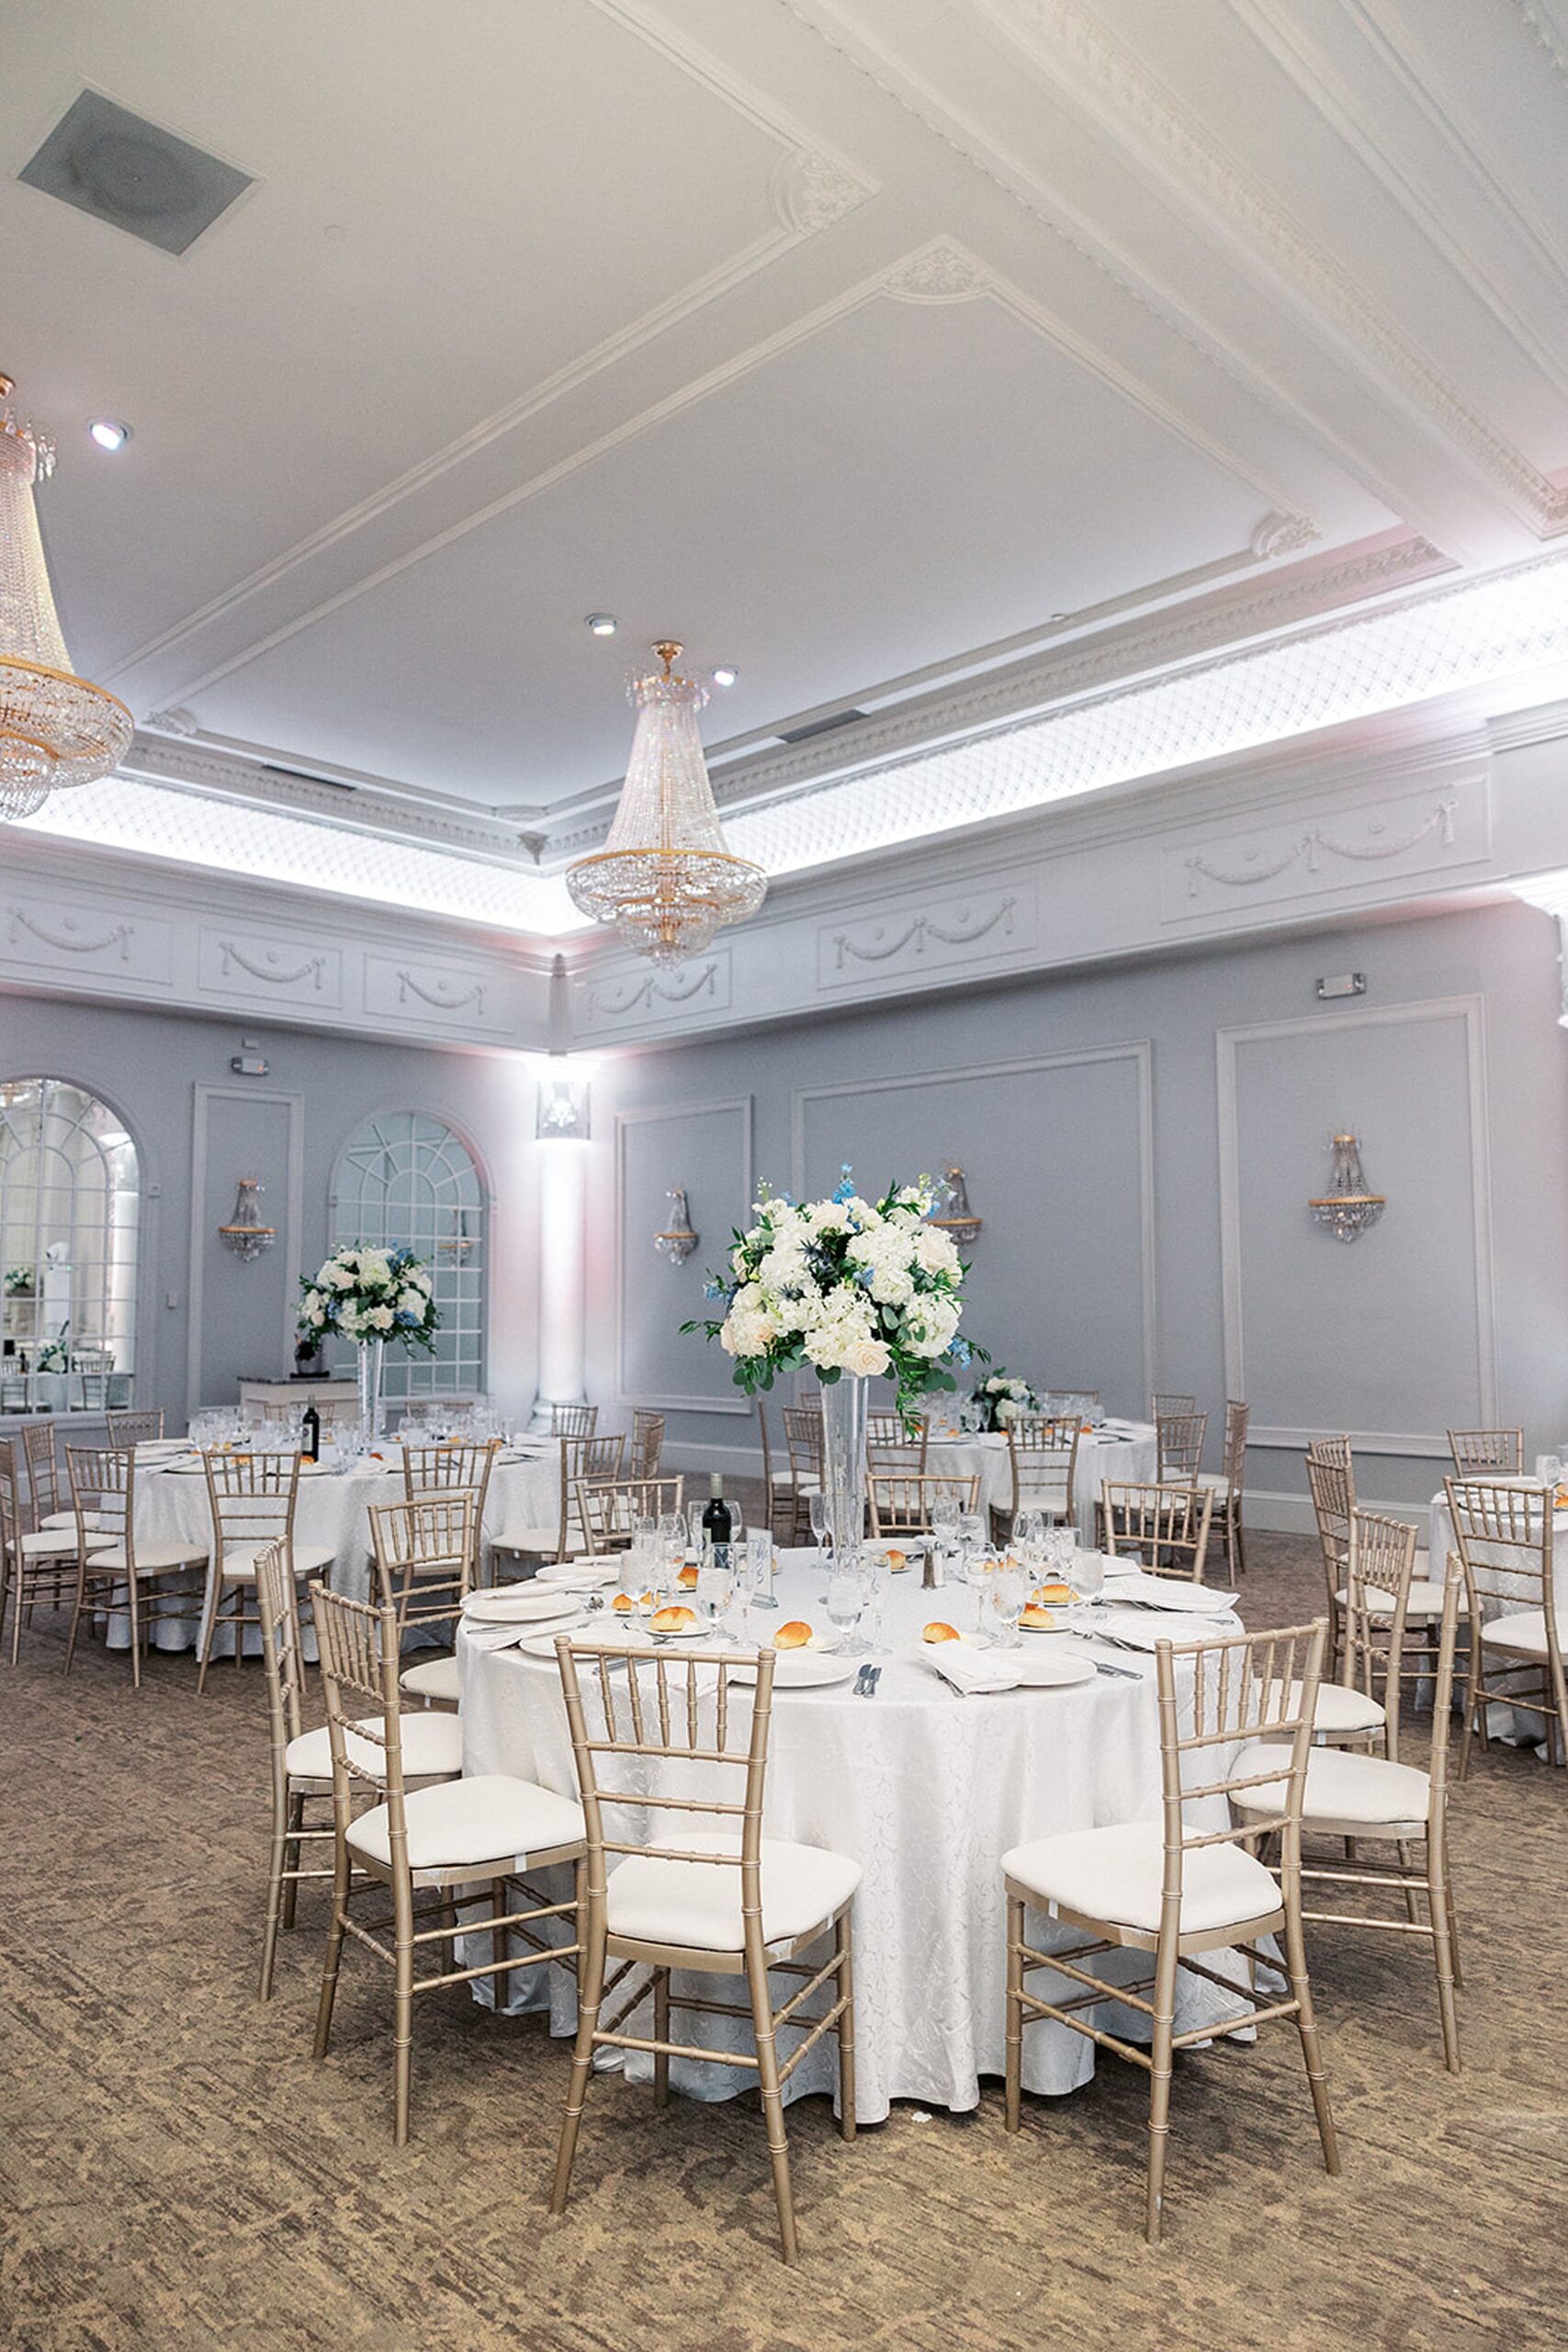 Details of a wedding reception set up in a grand ballroom with crystal chendeliers